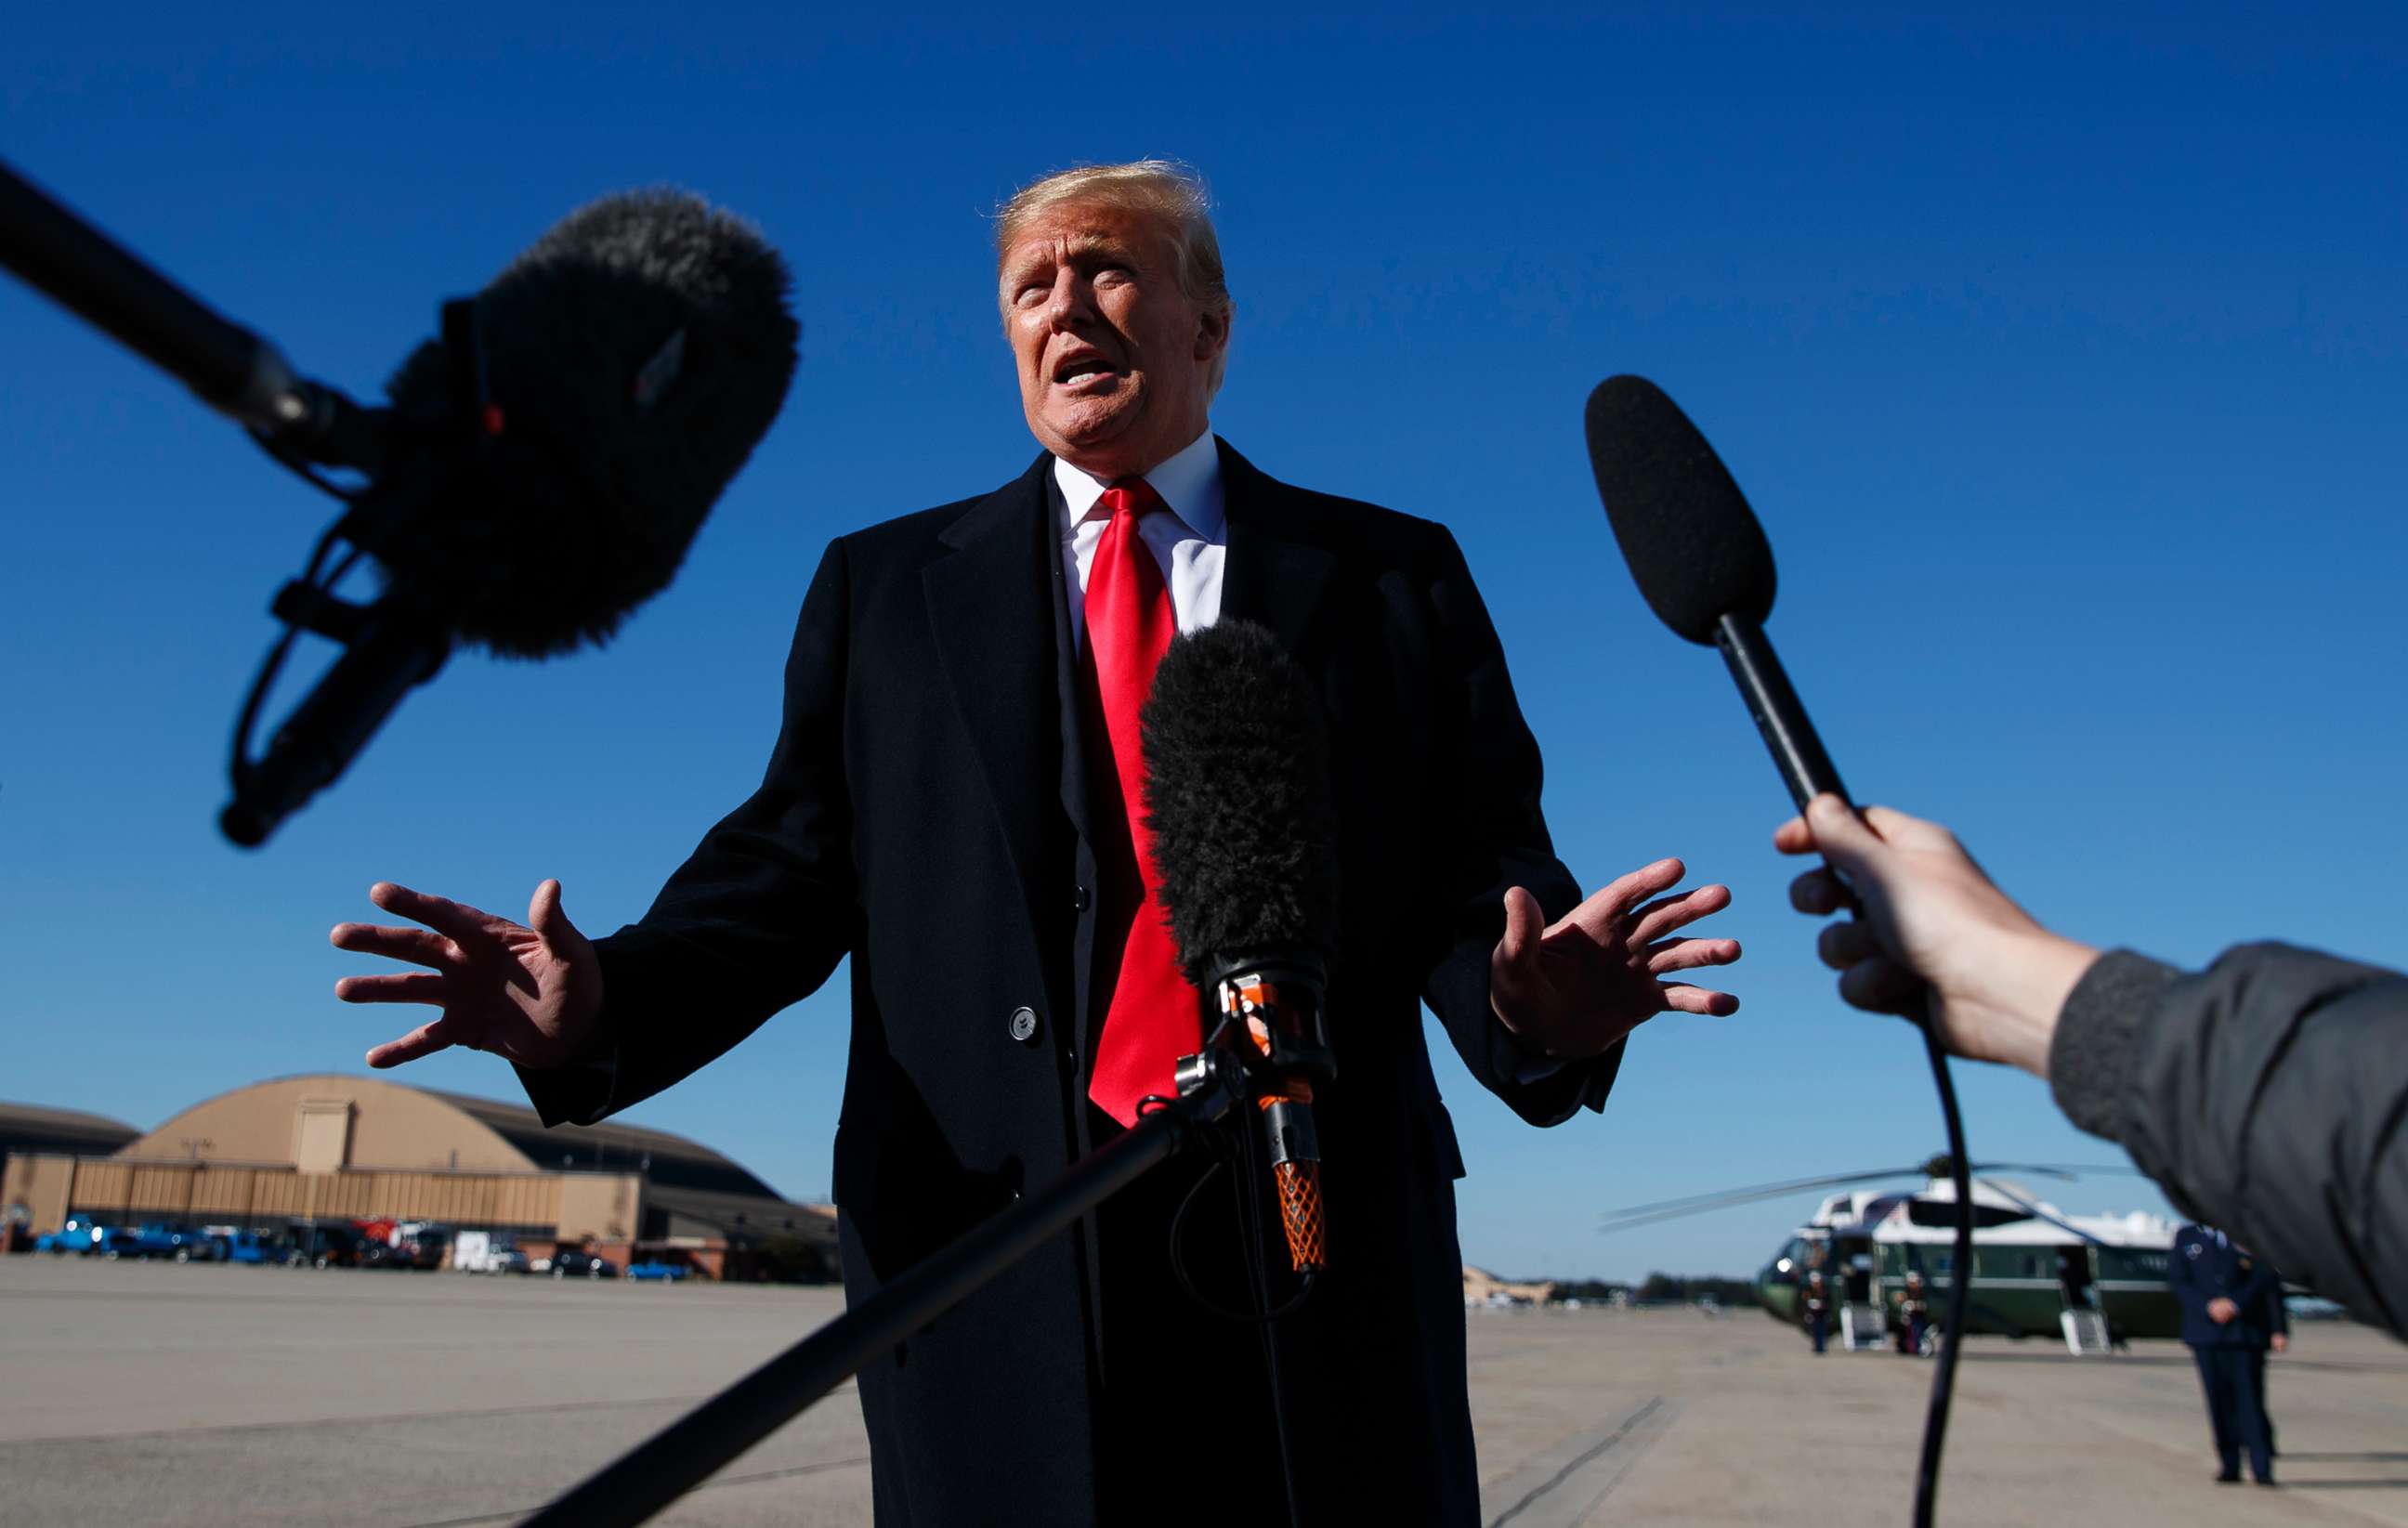 PHOTO: President Donald Trump talks to the media about Jamal Khashoggi before boarding Air Force One, Oct. 18, 2018, in Andrews Air Force Base, Md.